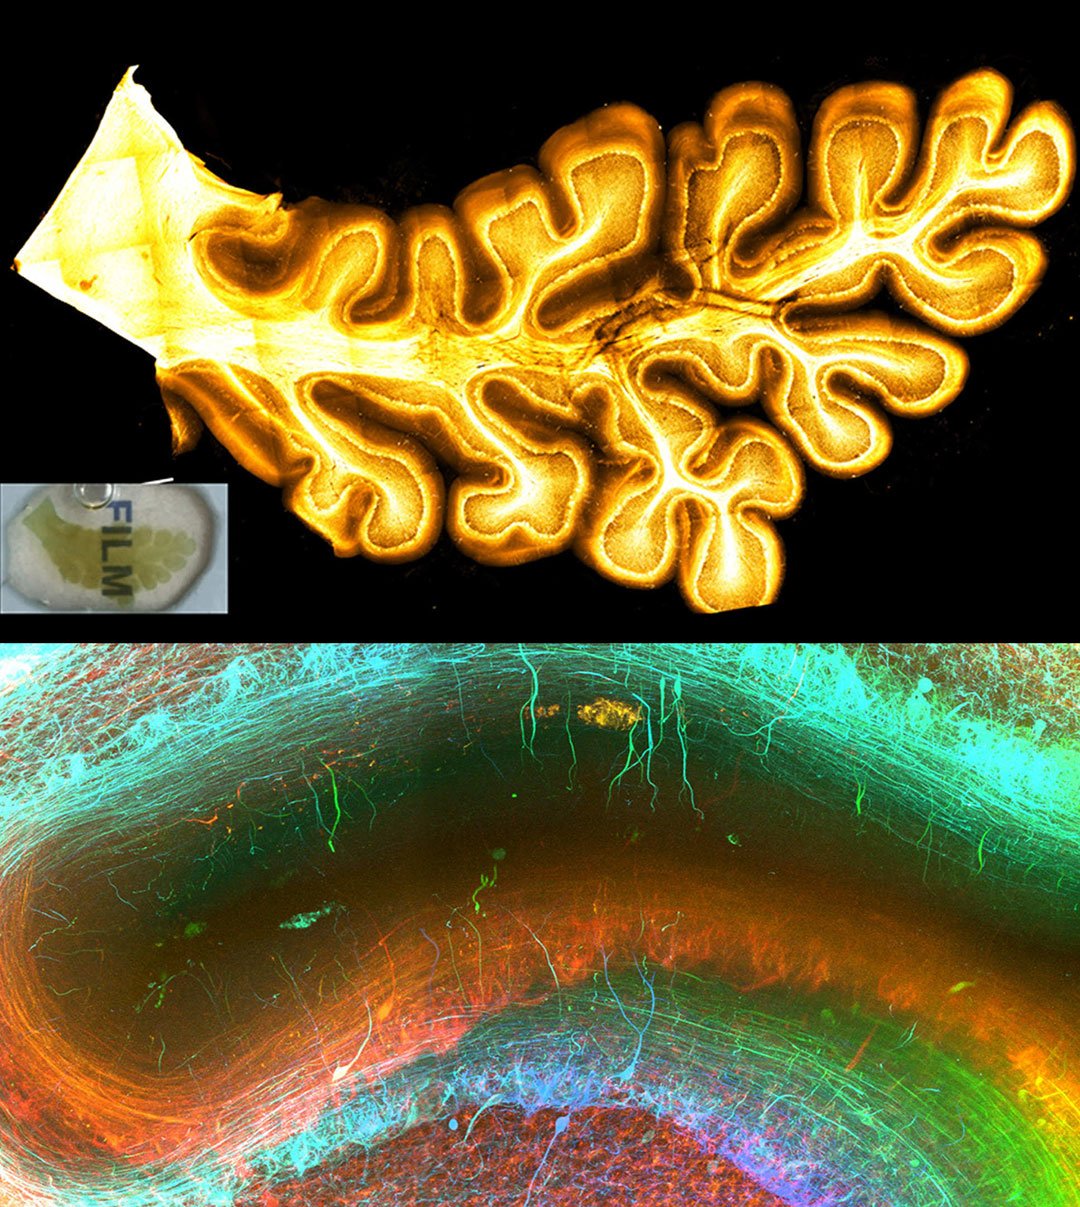 Technique reveals microscopic brain structures. Top: A small cross section of the cerebellum; Bottom: The close up of a fragment of the same sample, revealing networks of brain cells